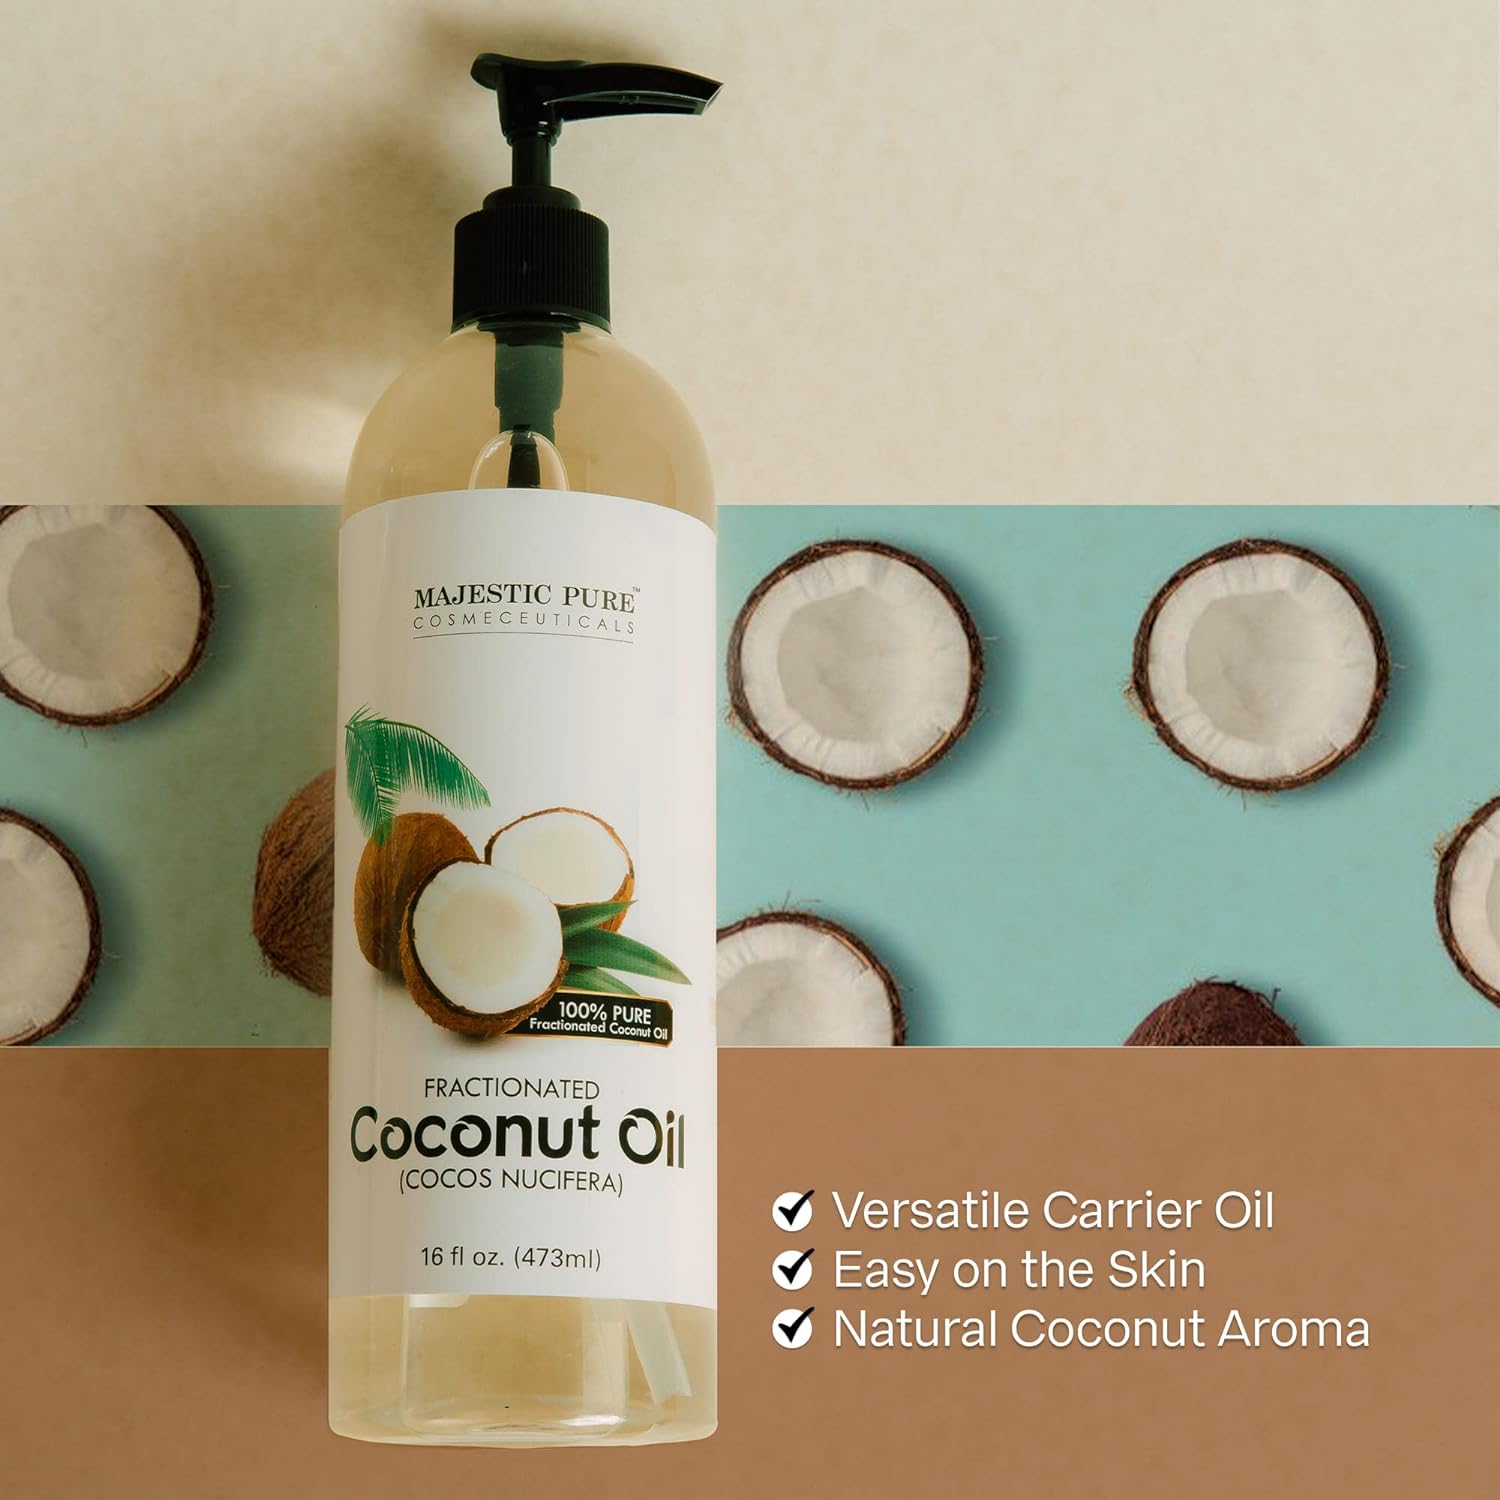 Majestic Pure Fractionated Coconut Oil - Relaxing Massage Oil, Liquid 